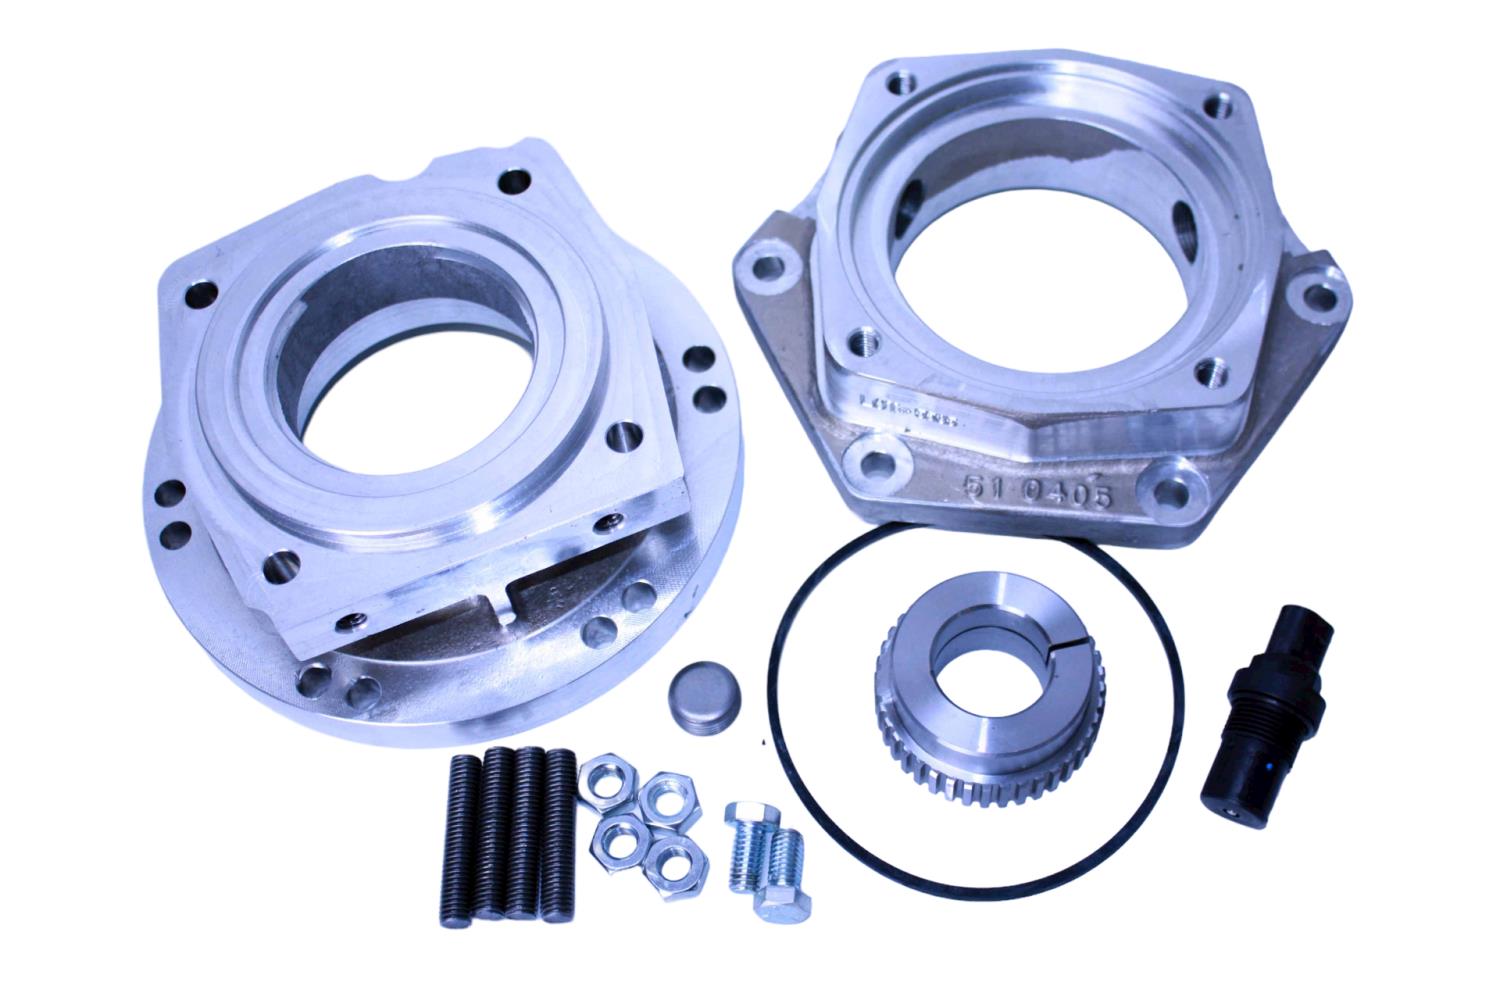 AS-9300 Transmission Adapter, 4L60E Hex Pattern To Atlas